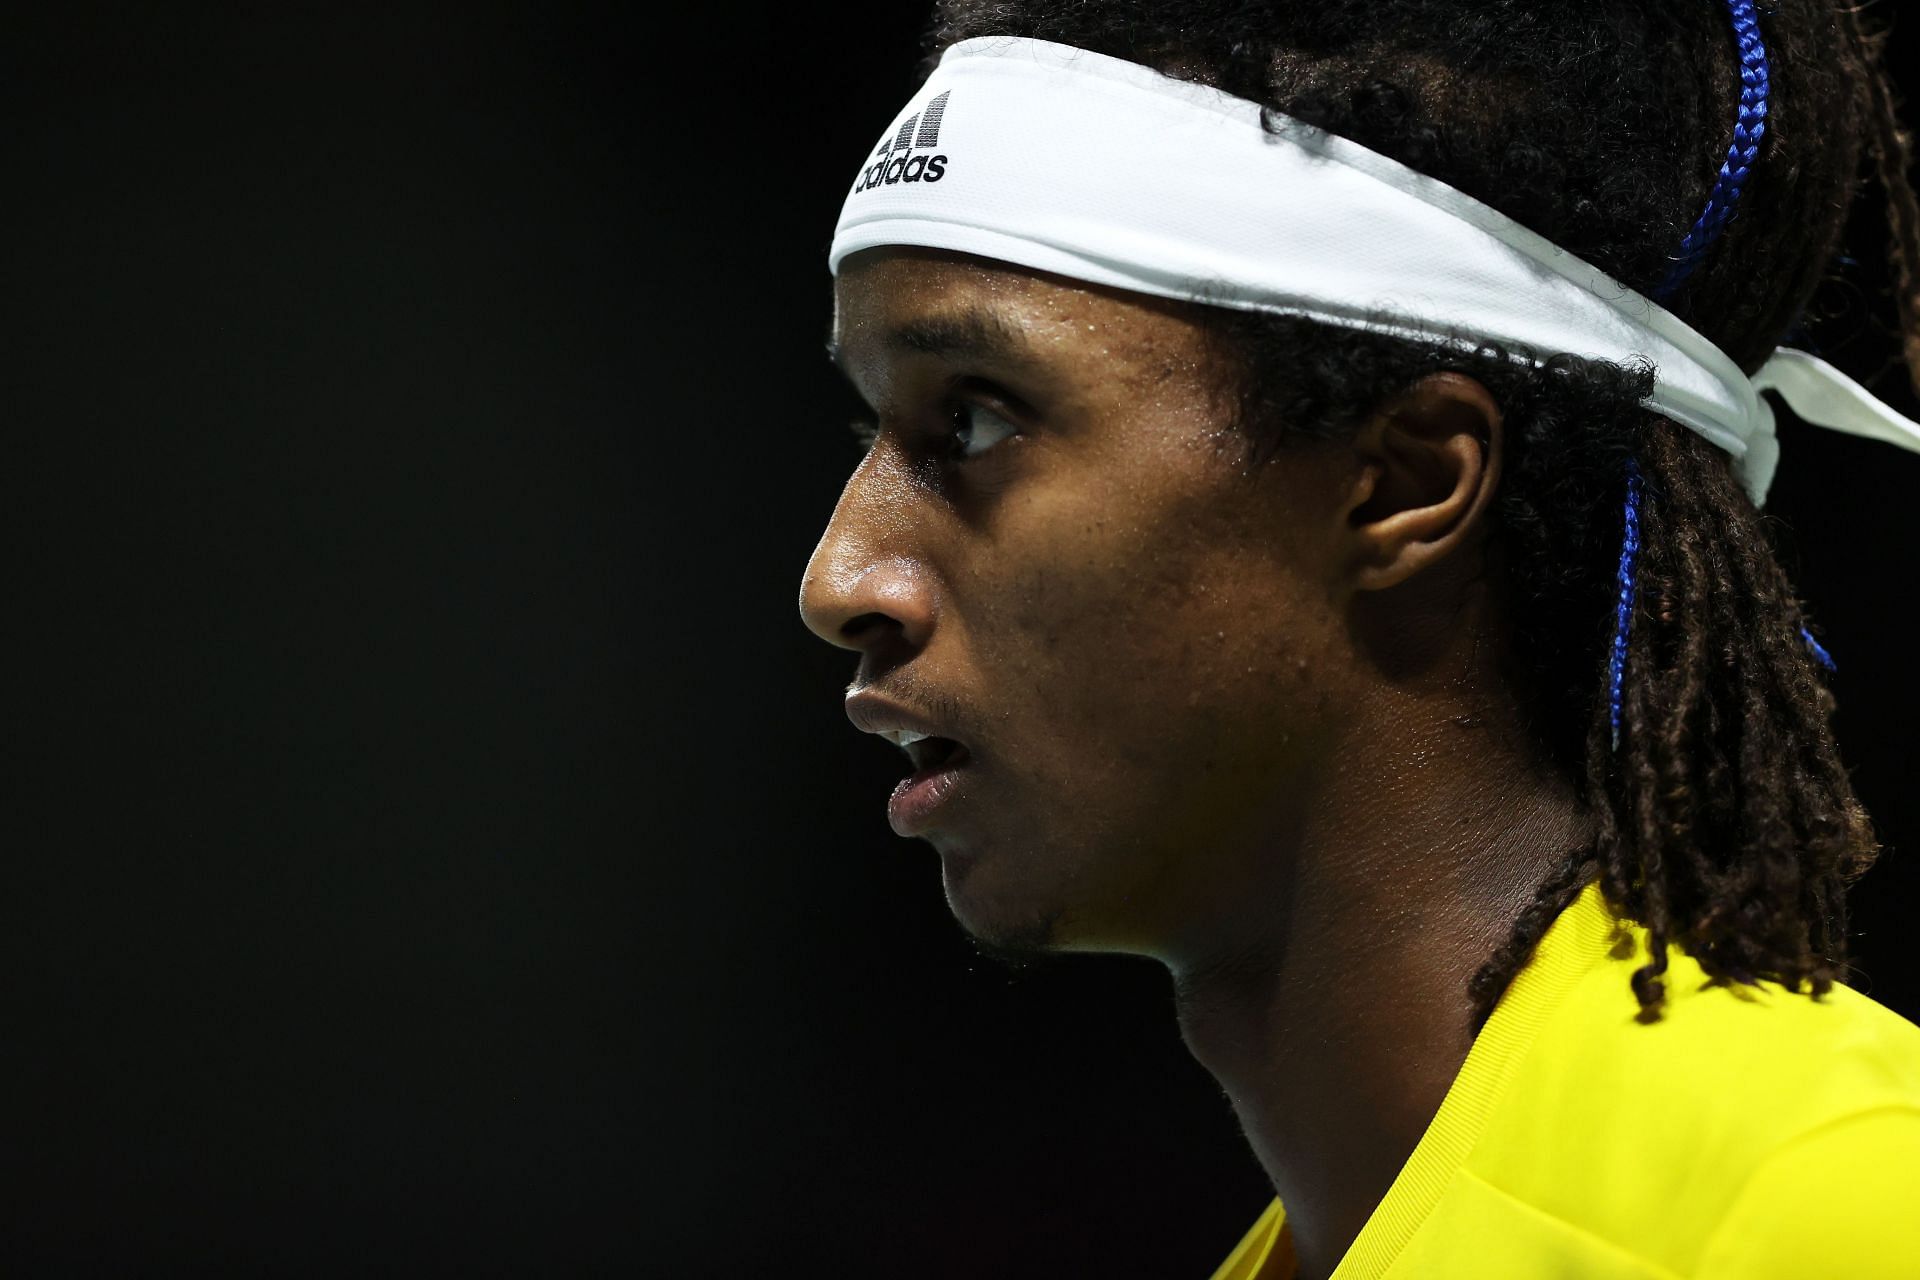 Mikael Ymer representing Sweden at the 2021 Davis Cup